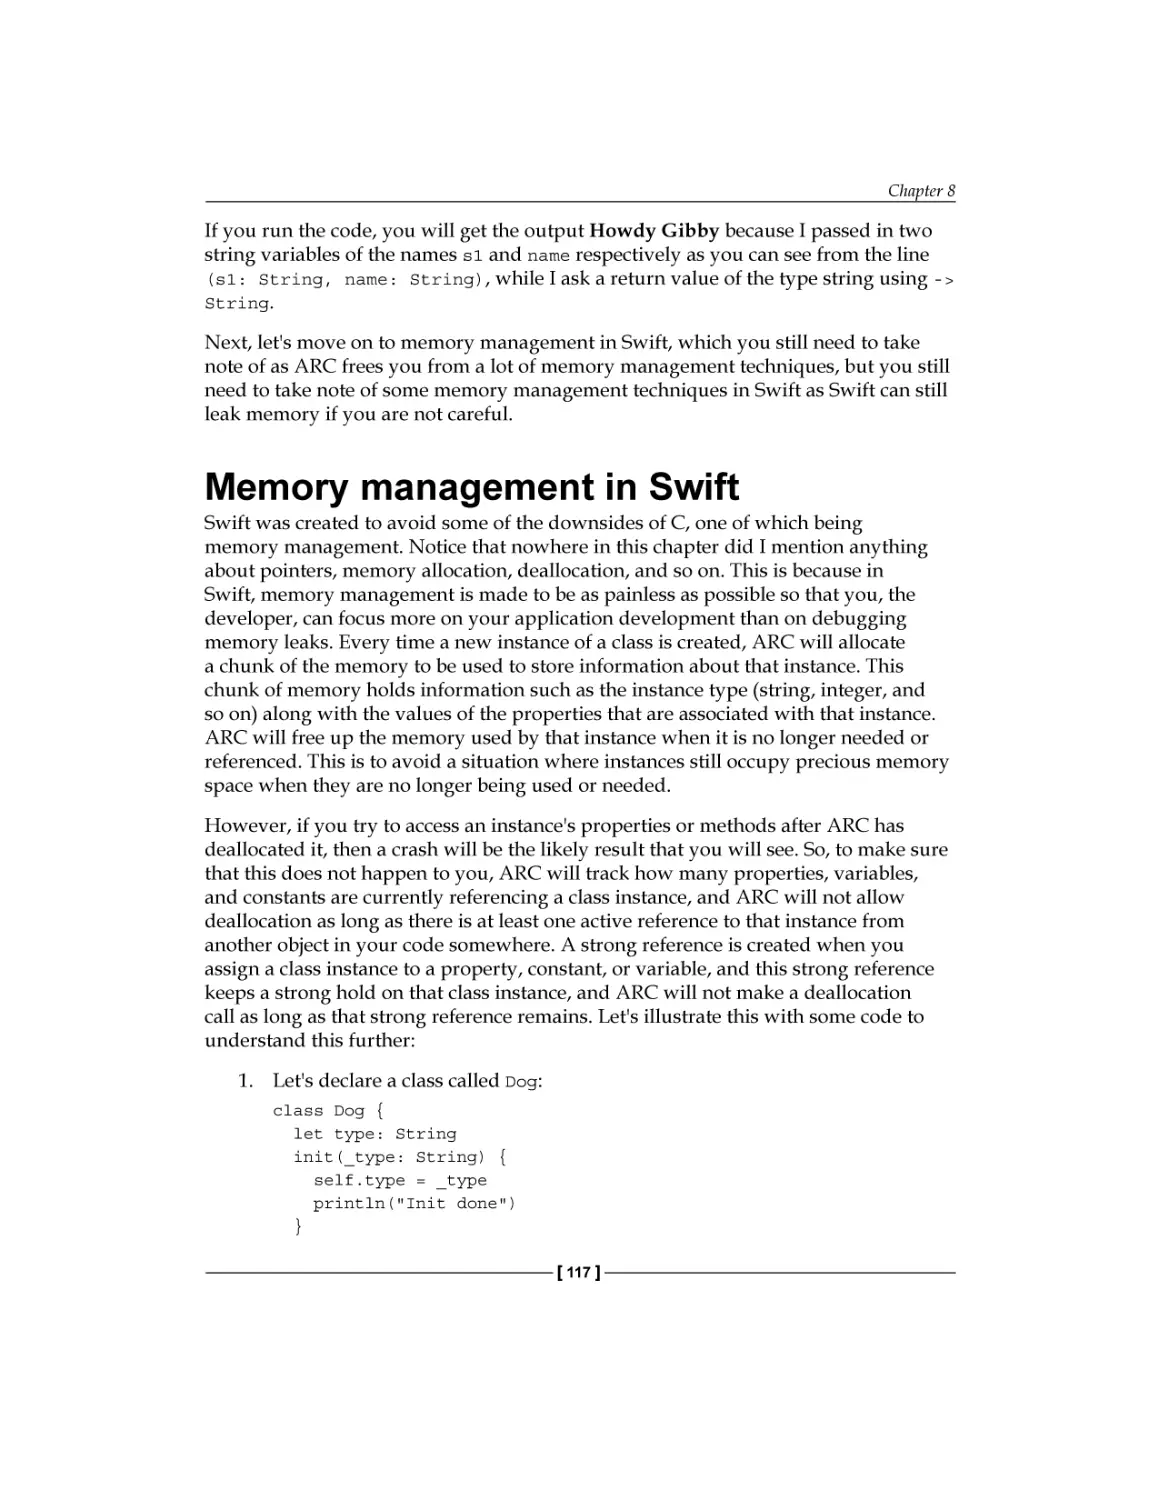 Memory management in Swift